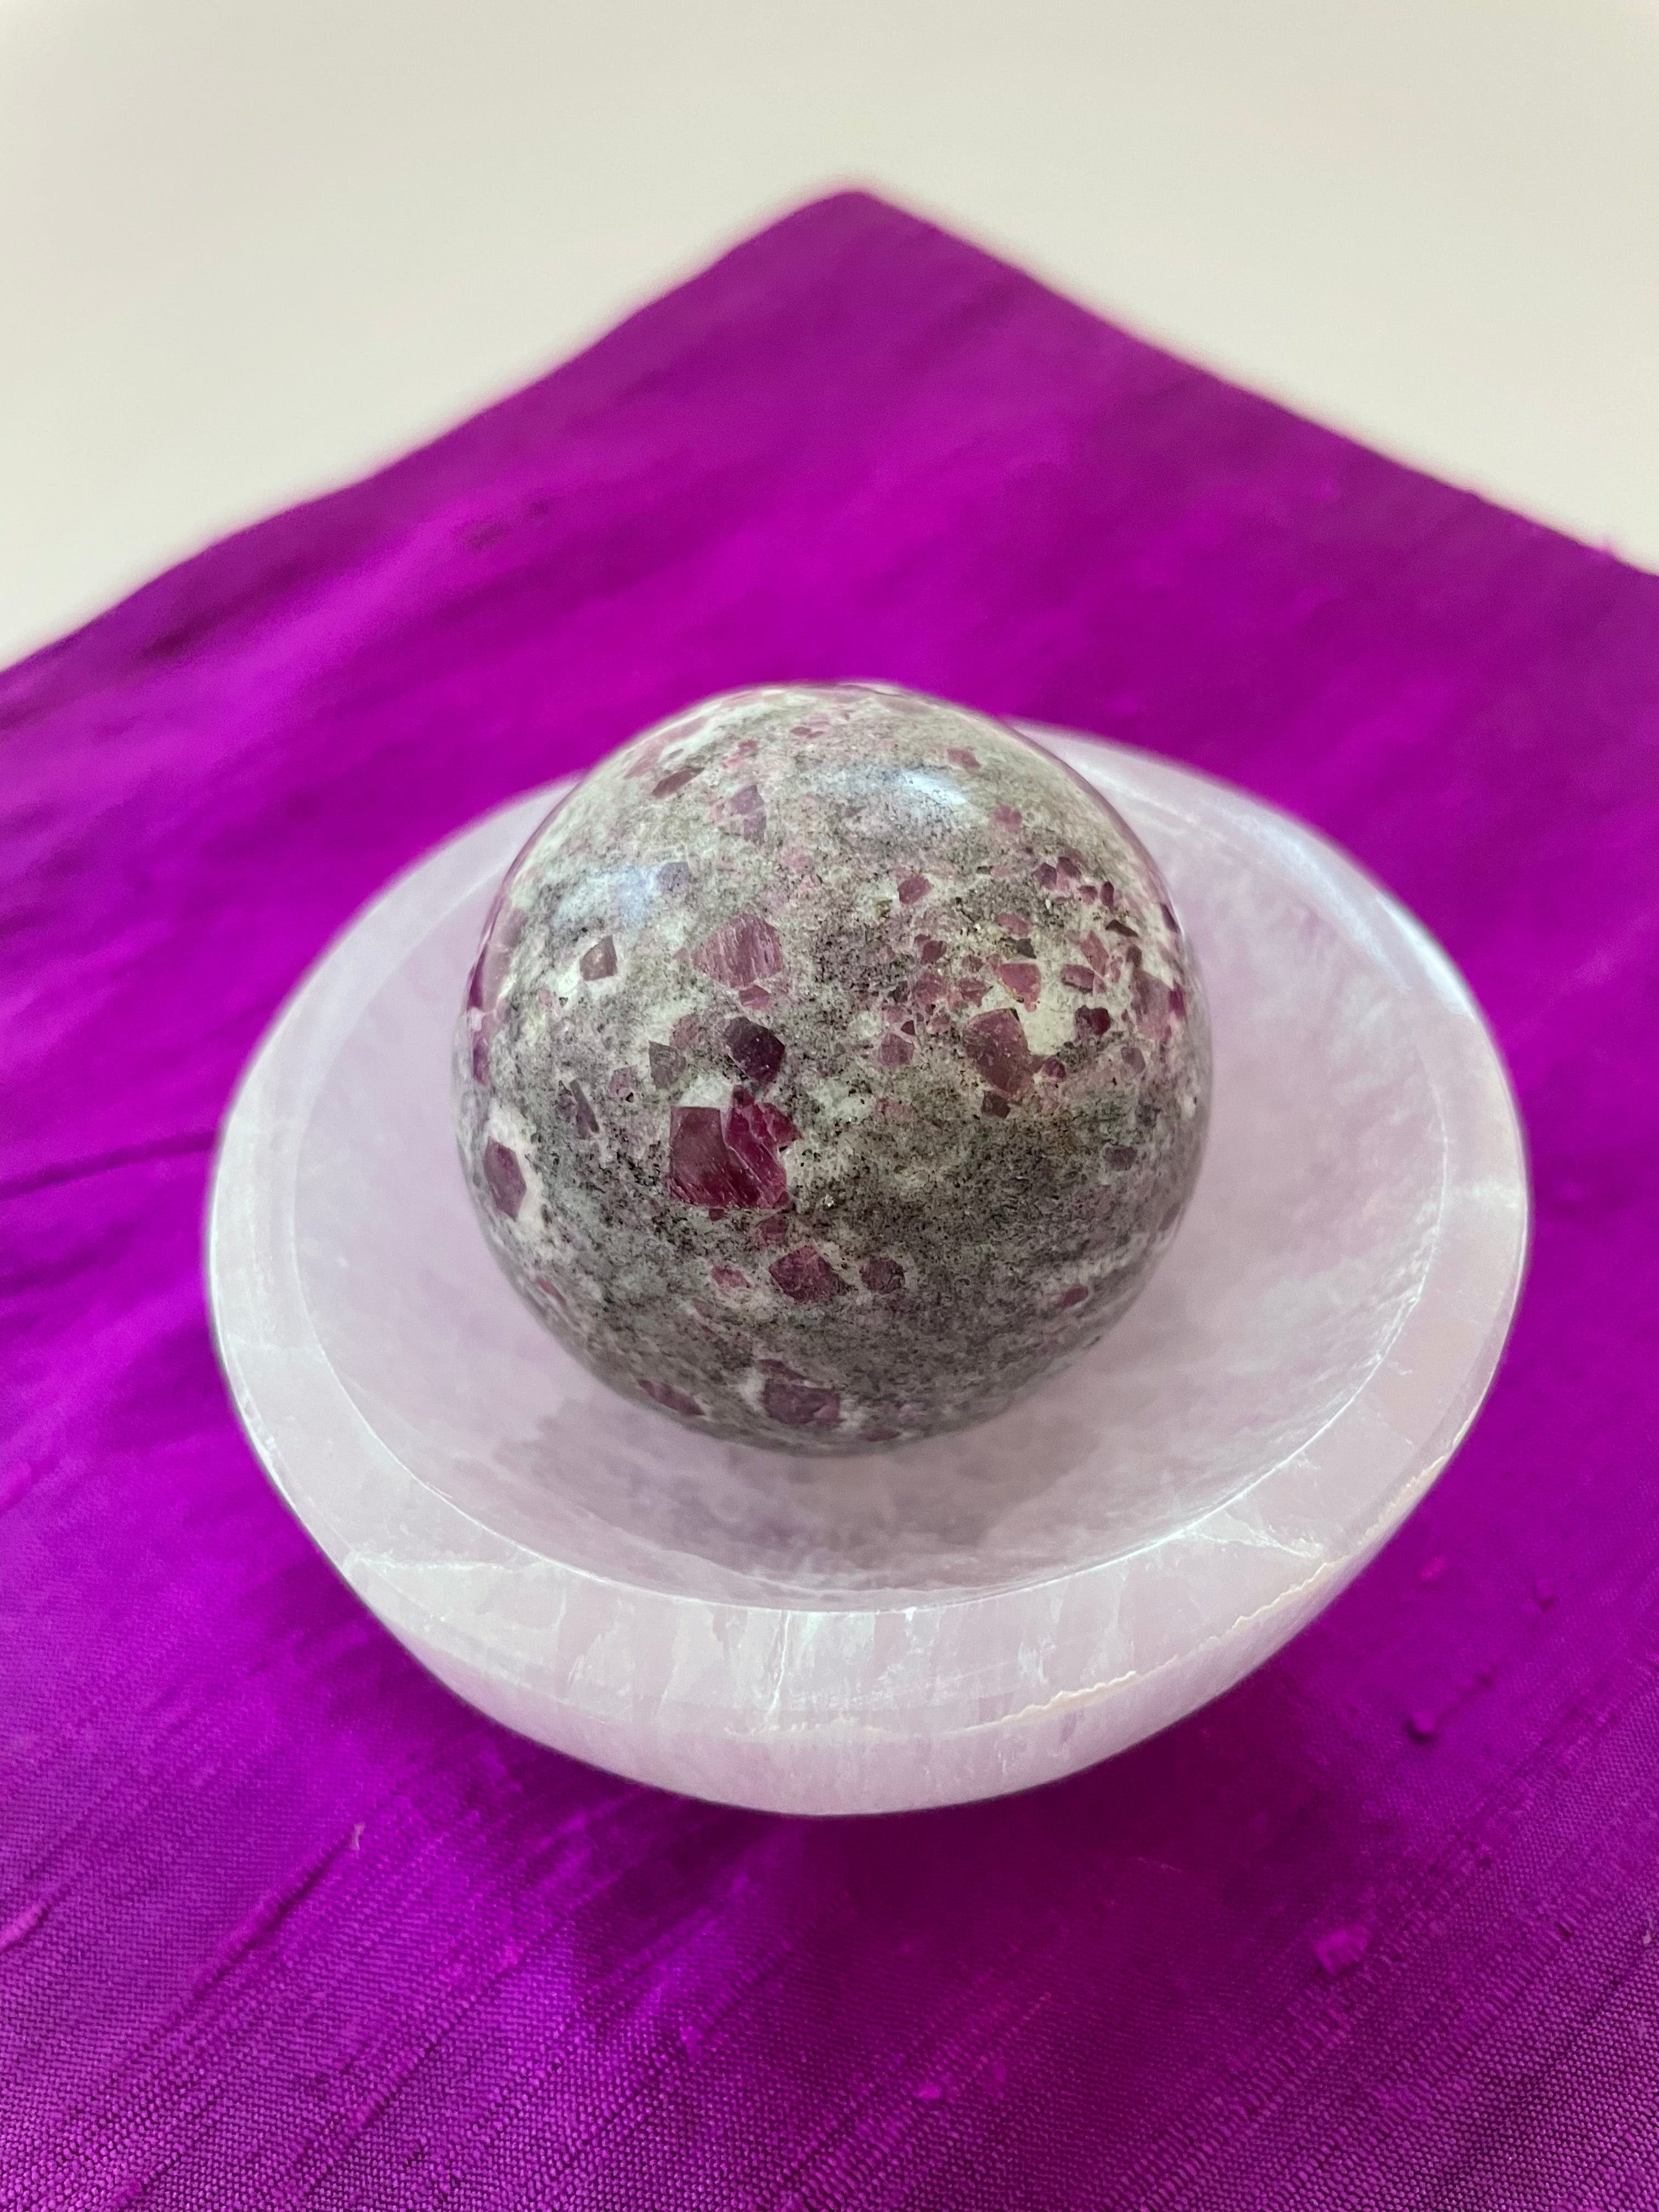 Alternate view. Ruby in matrix sphere is perfect for your altar, for meditation, as décor in your home or office. It consists of rubies set in their natural stone matrix or base. Ruby balances the heart, increases energy levels. It is a stone of love and passion and sexuality. It protects against psychic attack. It is a stone of prosperity and helps you to draw in abundance and maintain wealth. It enhances courage and leadership & more. This sphere weighs 5.2 oz. Approx. 6" in circumference. $36.00.